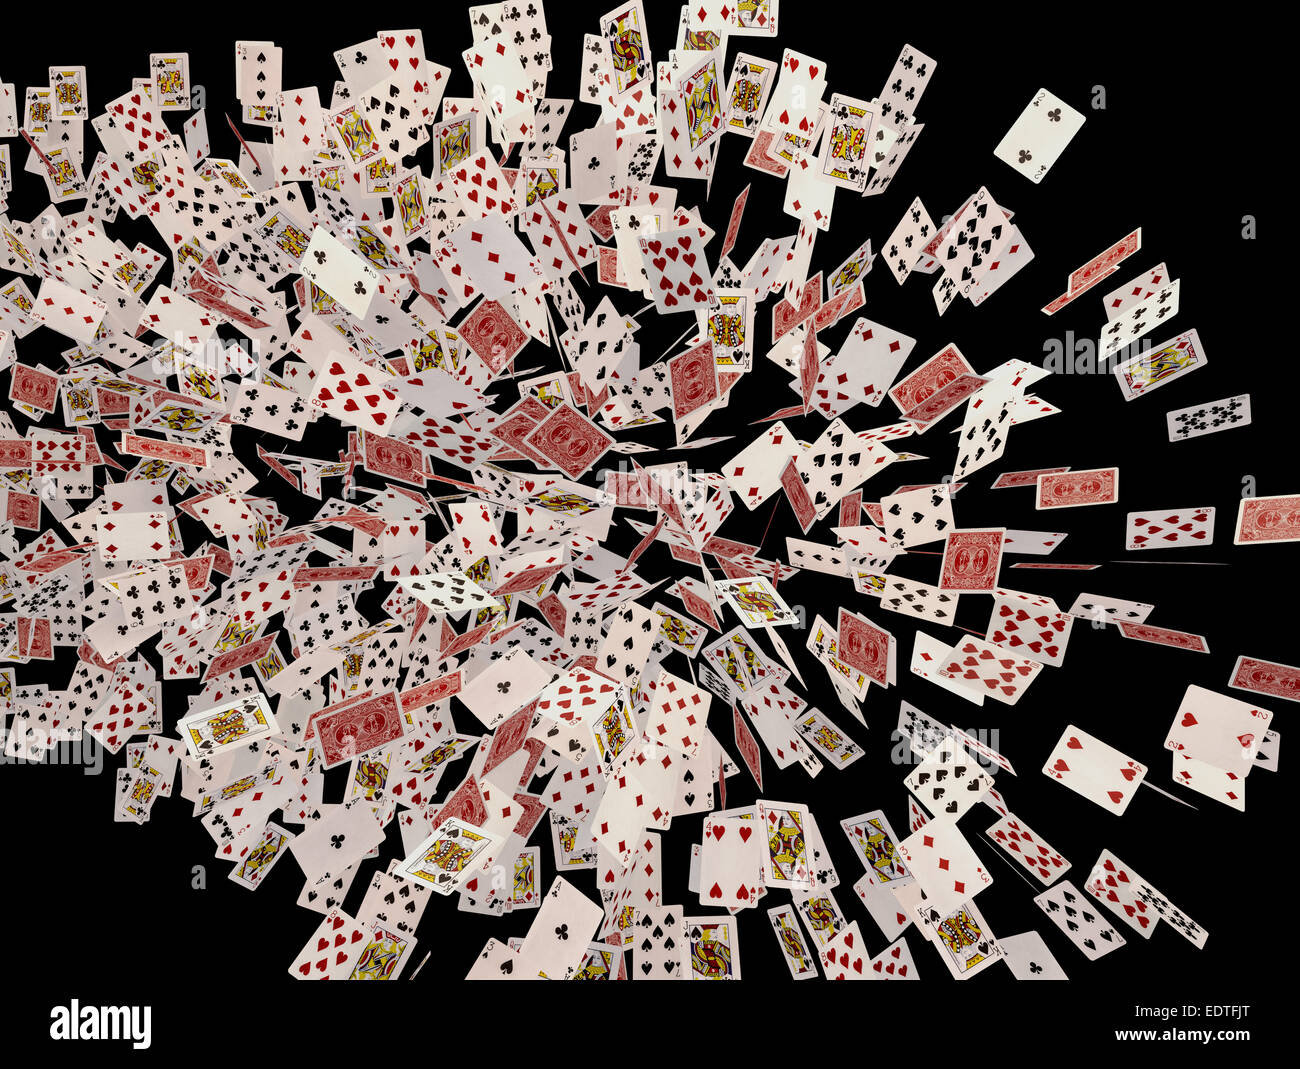 Playing cards flying over black background. Clipping path included. Stock Photo